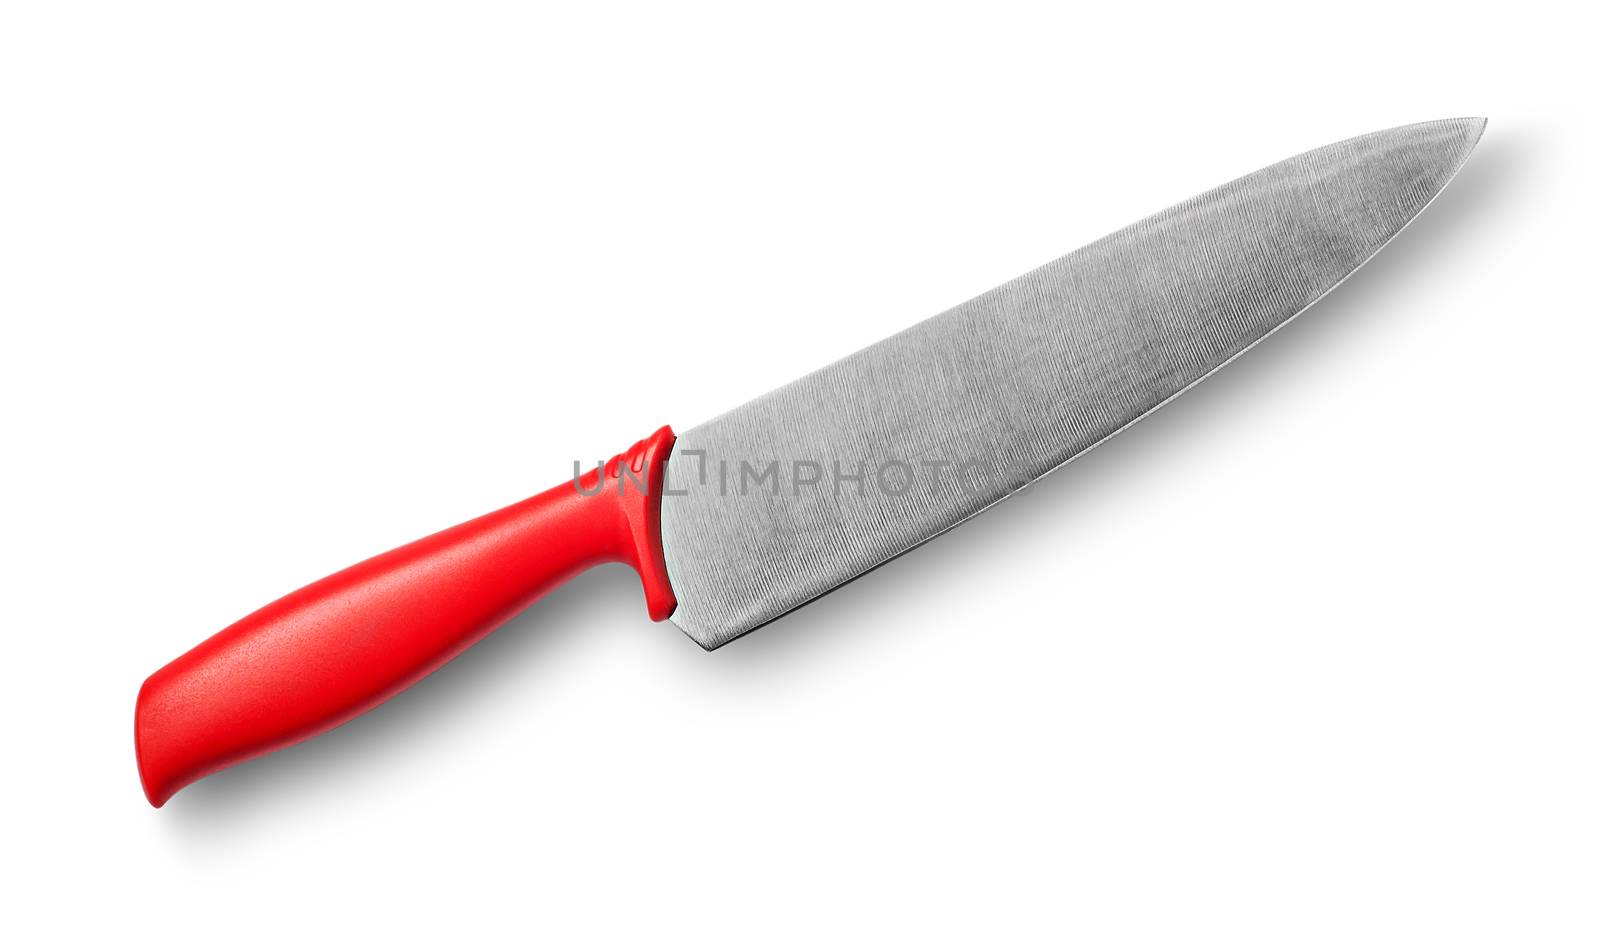 Big kitchen knife with red handle isolated on white background